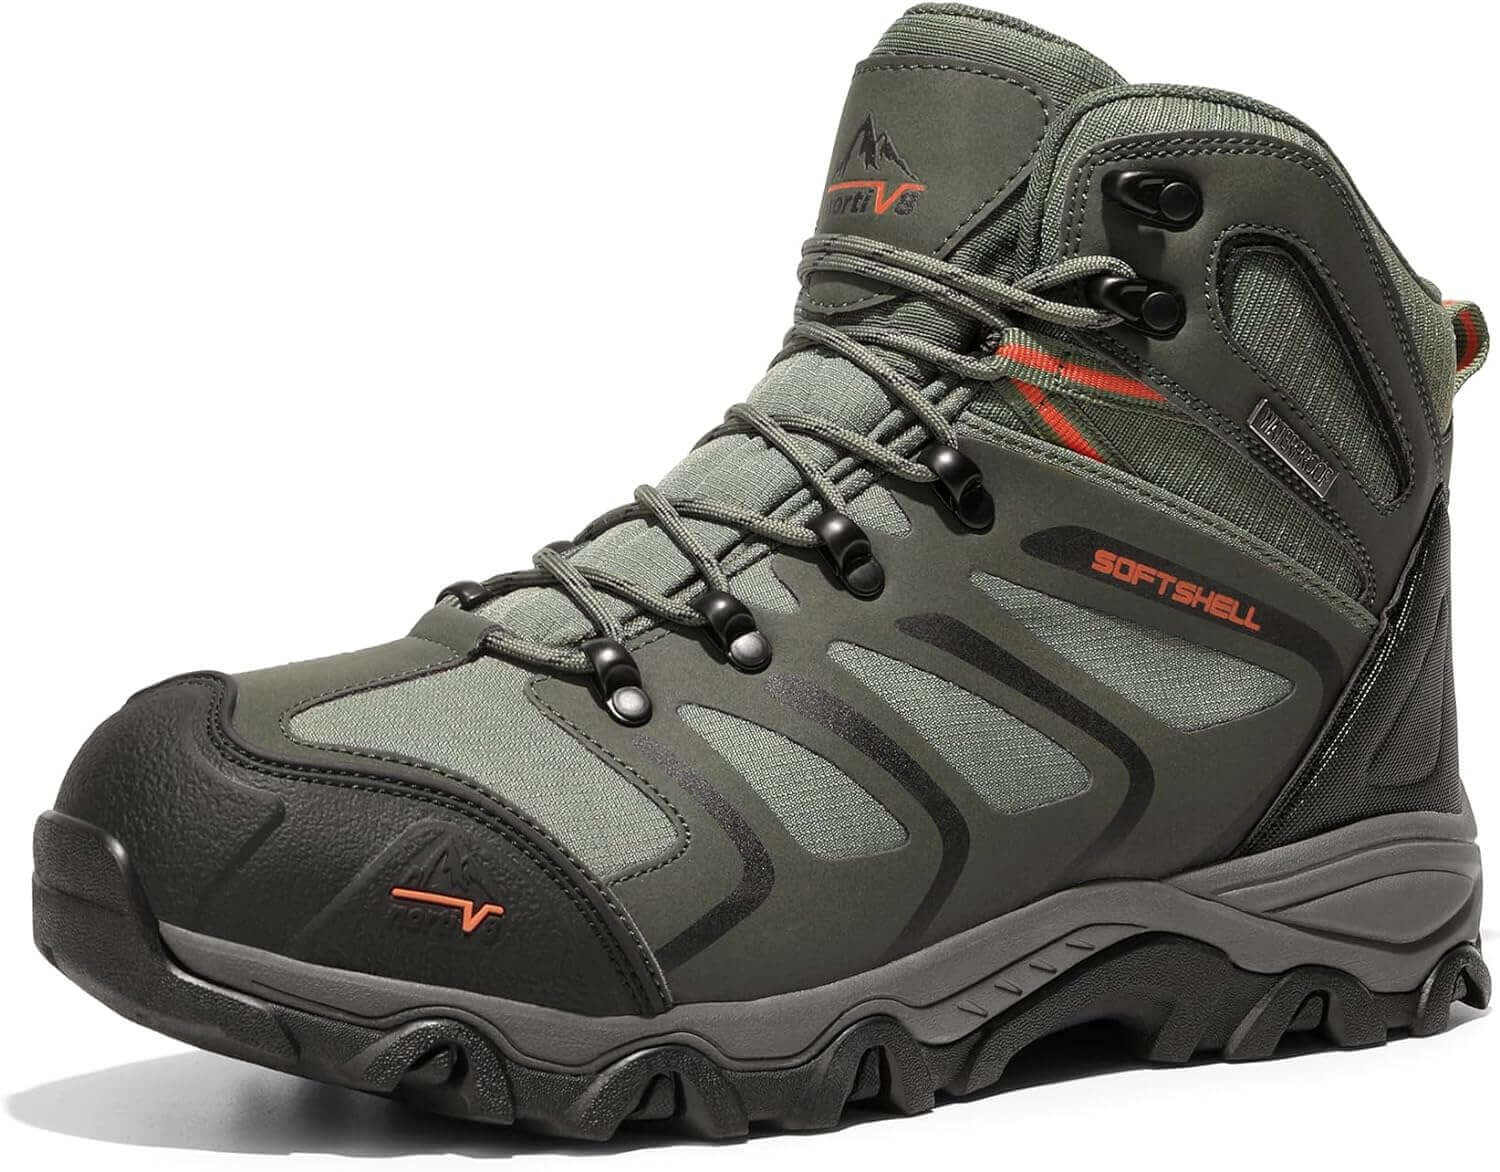 Shop The Latest >NORTIV 8 Men's Ankle High Waterproof Hiking Boots > *Only $83.99*> From The Top Brand > *NORTIV 8l* > Shop Now and Get Free Shipping On Orders Over $45.00 >*Shop Earth Foot*